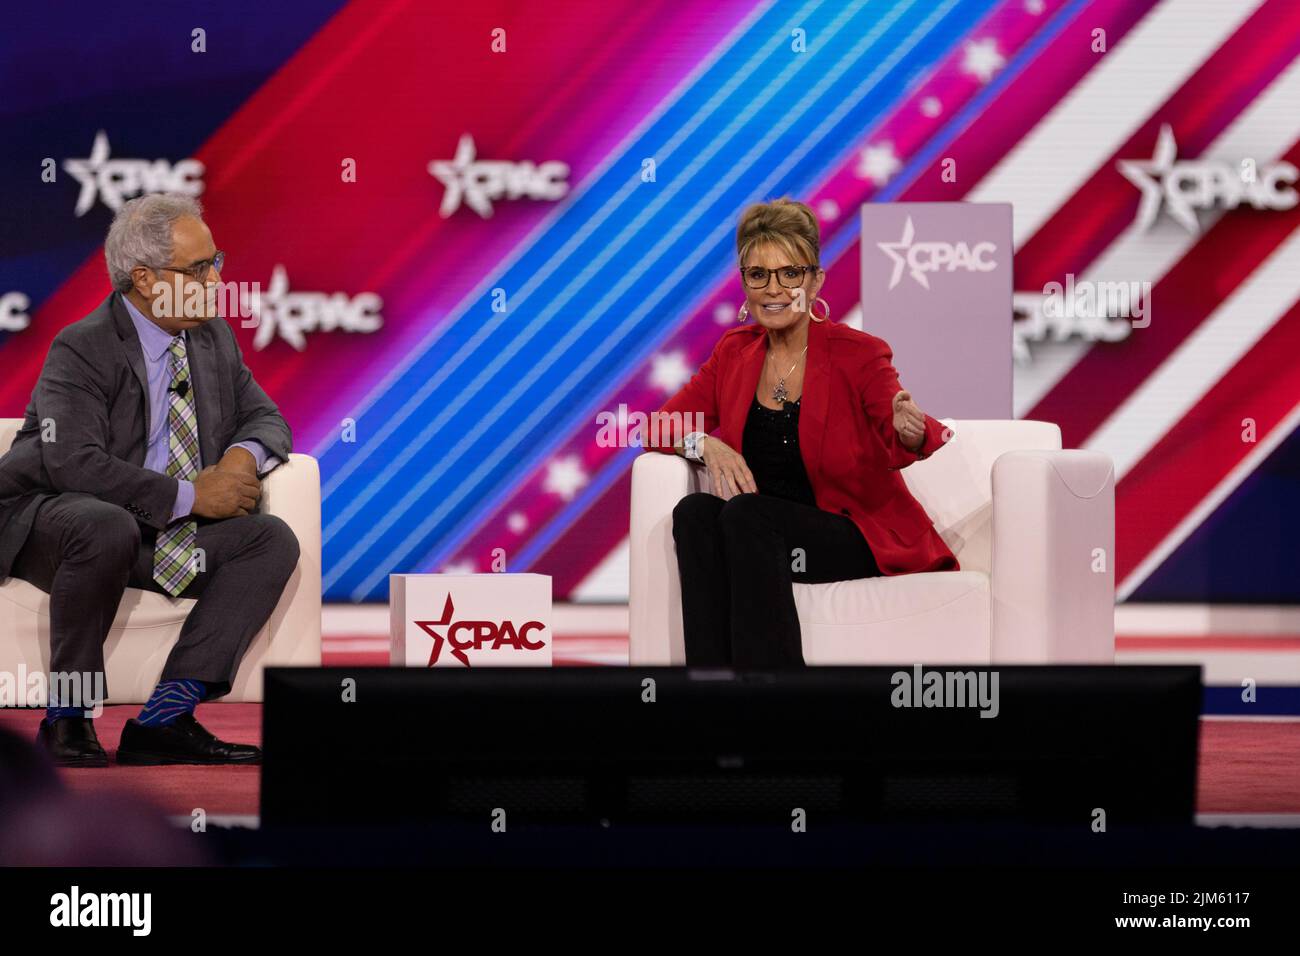 Dallas, USA. 04 Aug 2022. Charlie Gerow interviews Sarah Palin at the Conservative Political Action Conference. Credit: Valerio Pucci / Alamy Stock Photo